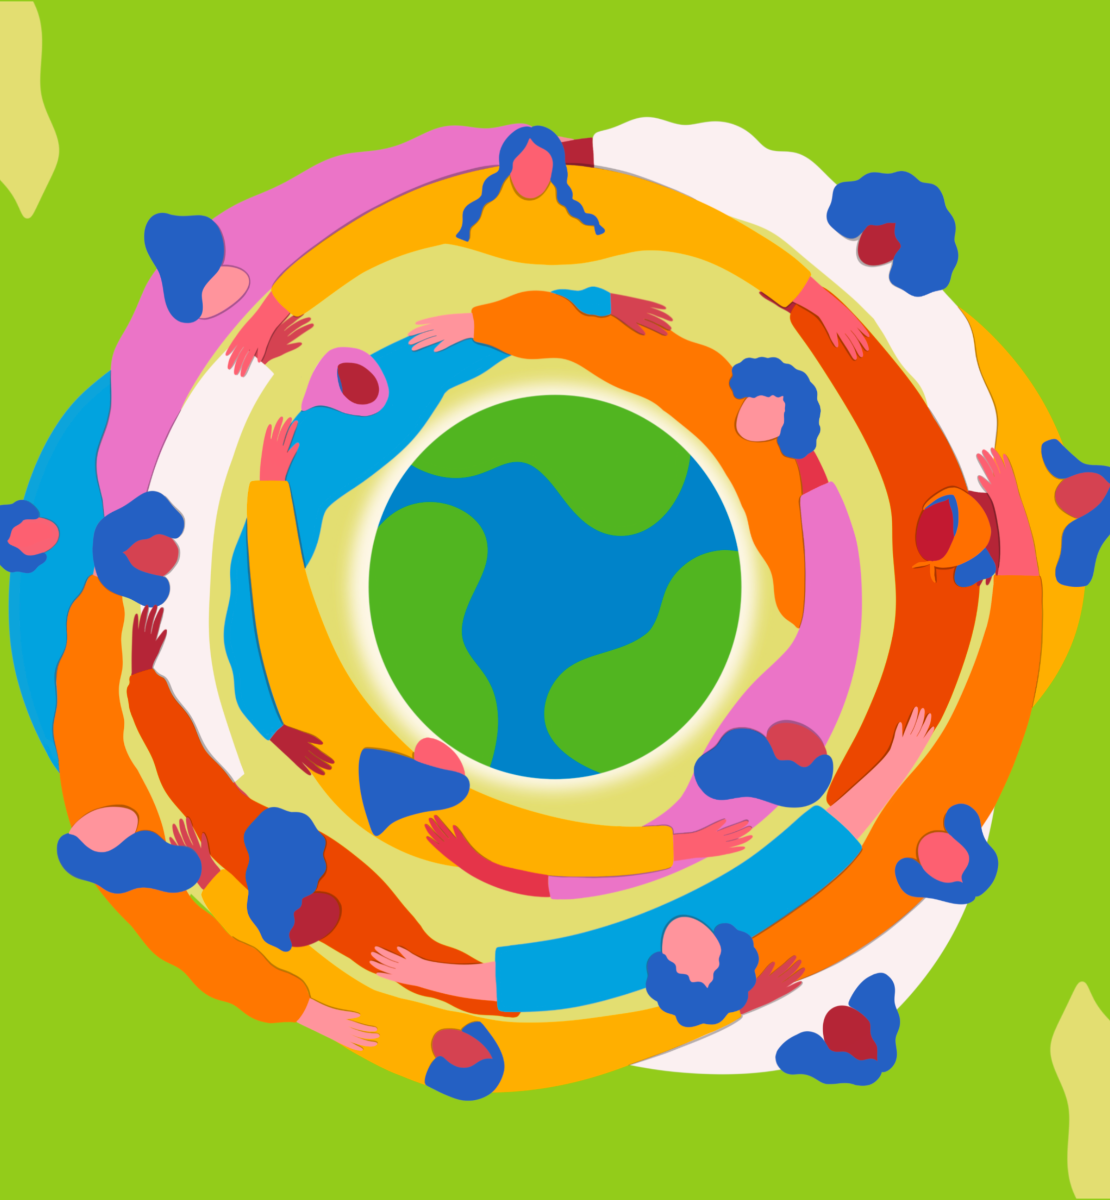 Women in bright colours forming circles around the earth against a mostly green background with olive branches on the upper left and lower right corner.